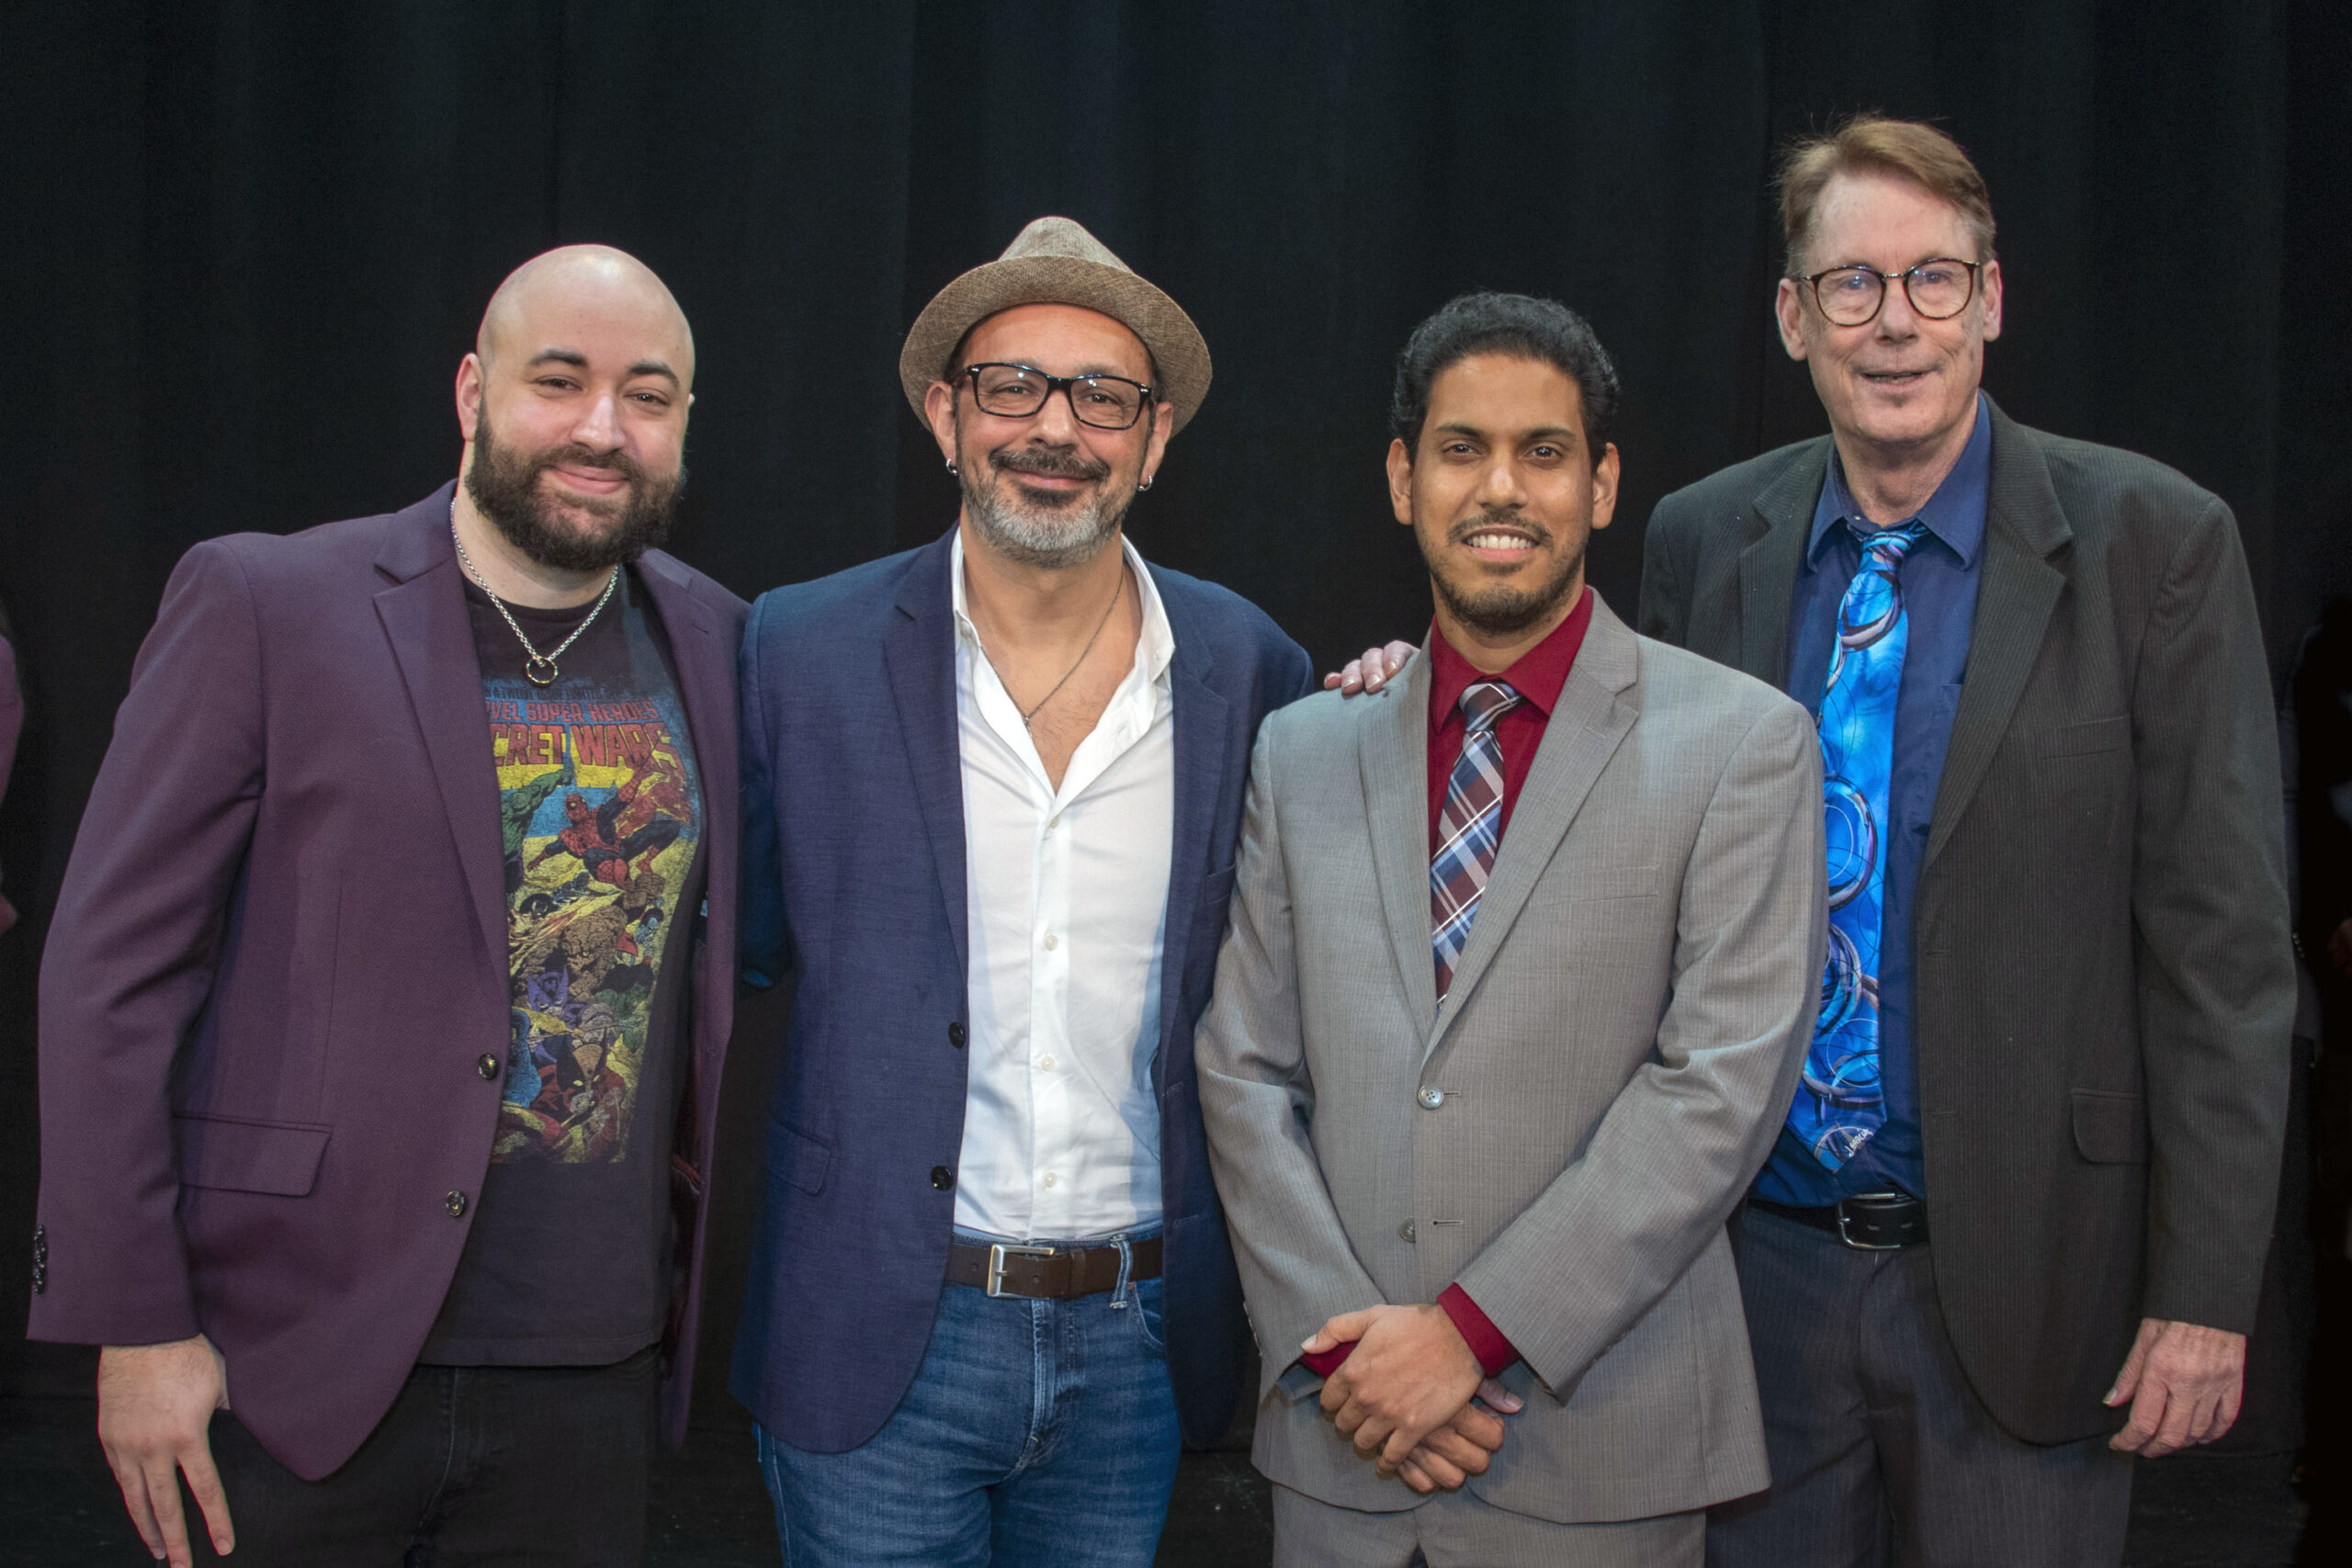 READY OR NOT—William Ashburn, playwright Michael Anthony Mercado, Anuj Naidu, and director James Thaggard.